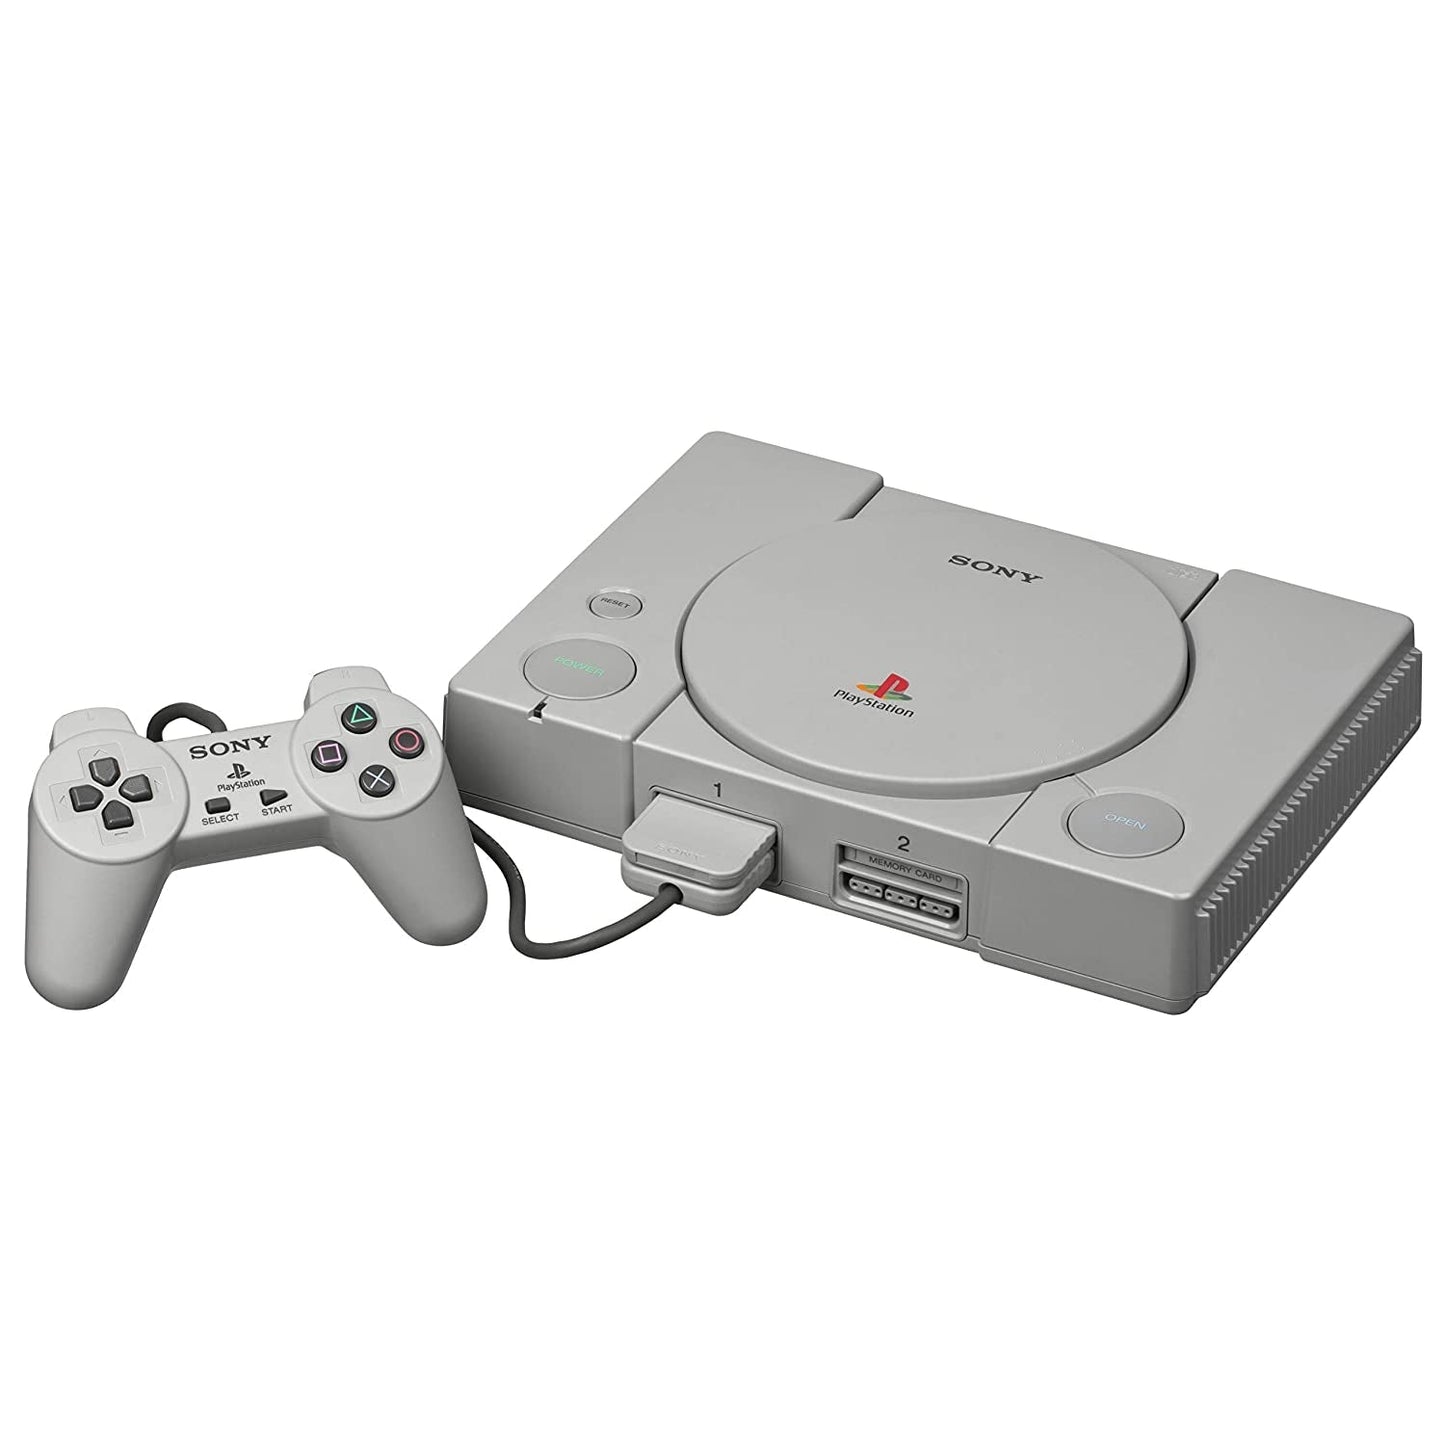 SONY Playstation 1 PS1 Console Console - Gray - 1 OEM Dualshock Wired Controller from 2P Gaming